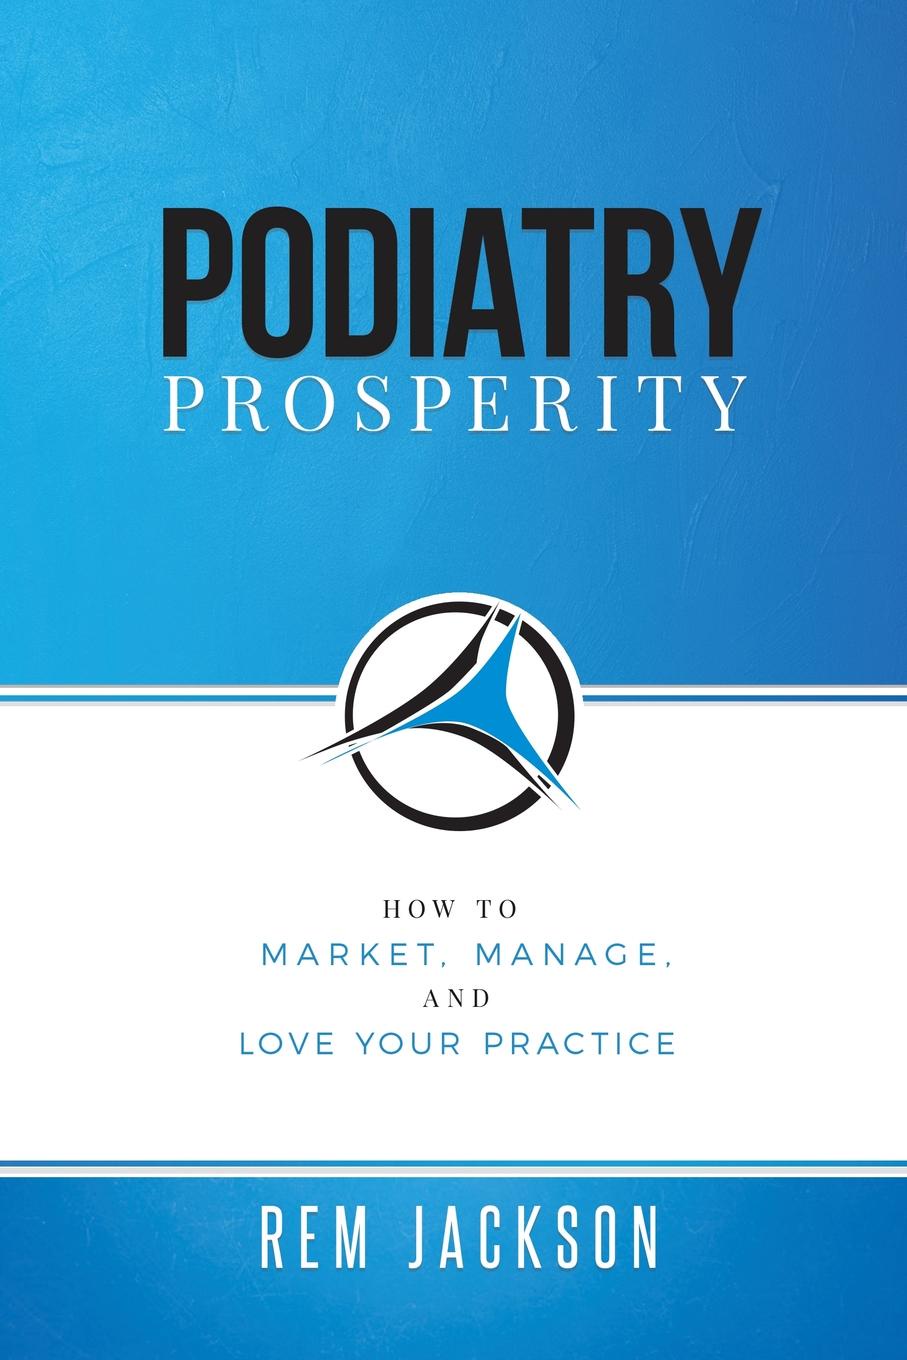 Podiatry Prosperity. How to Market, Manage, and Love Your Practice